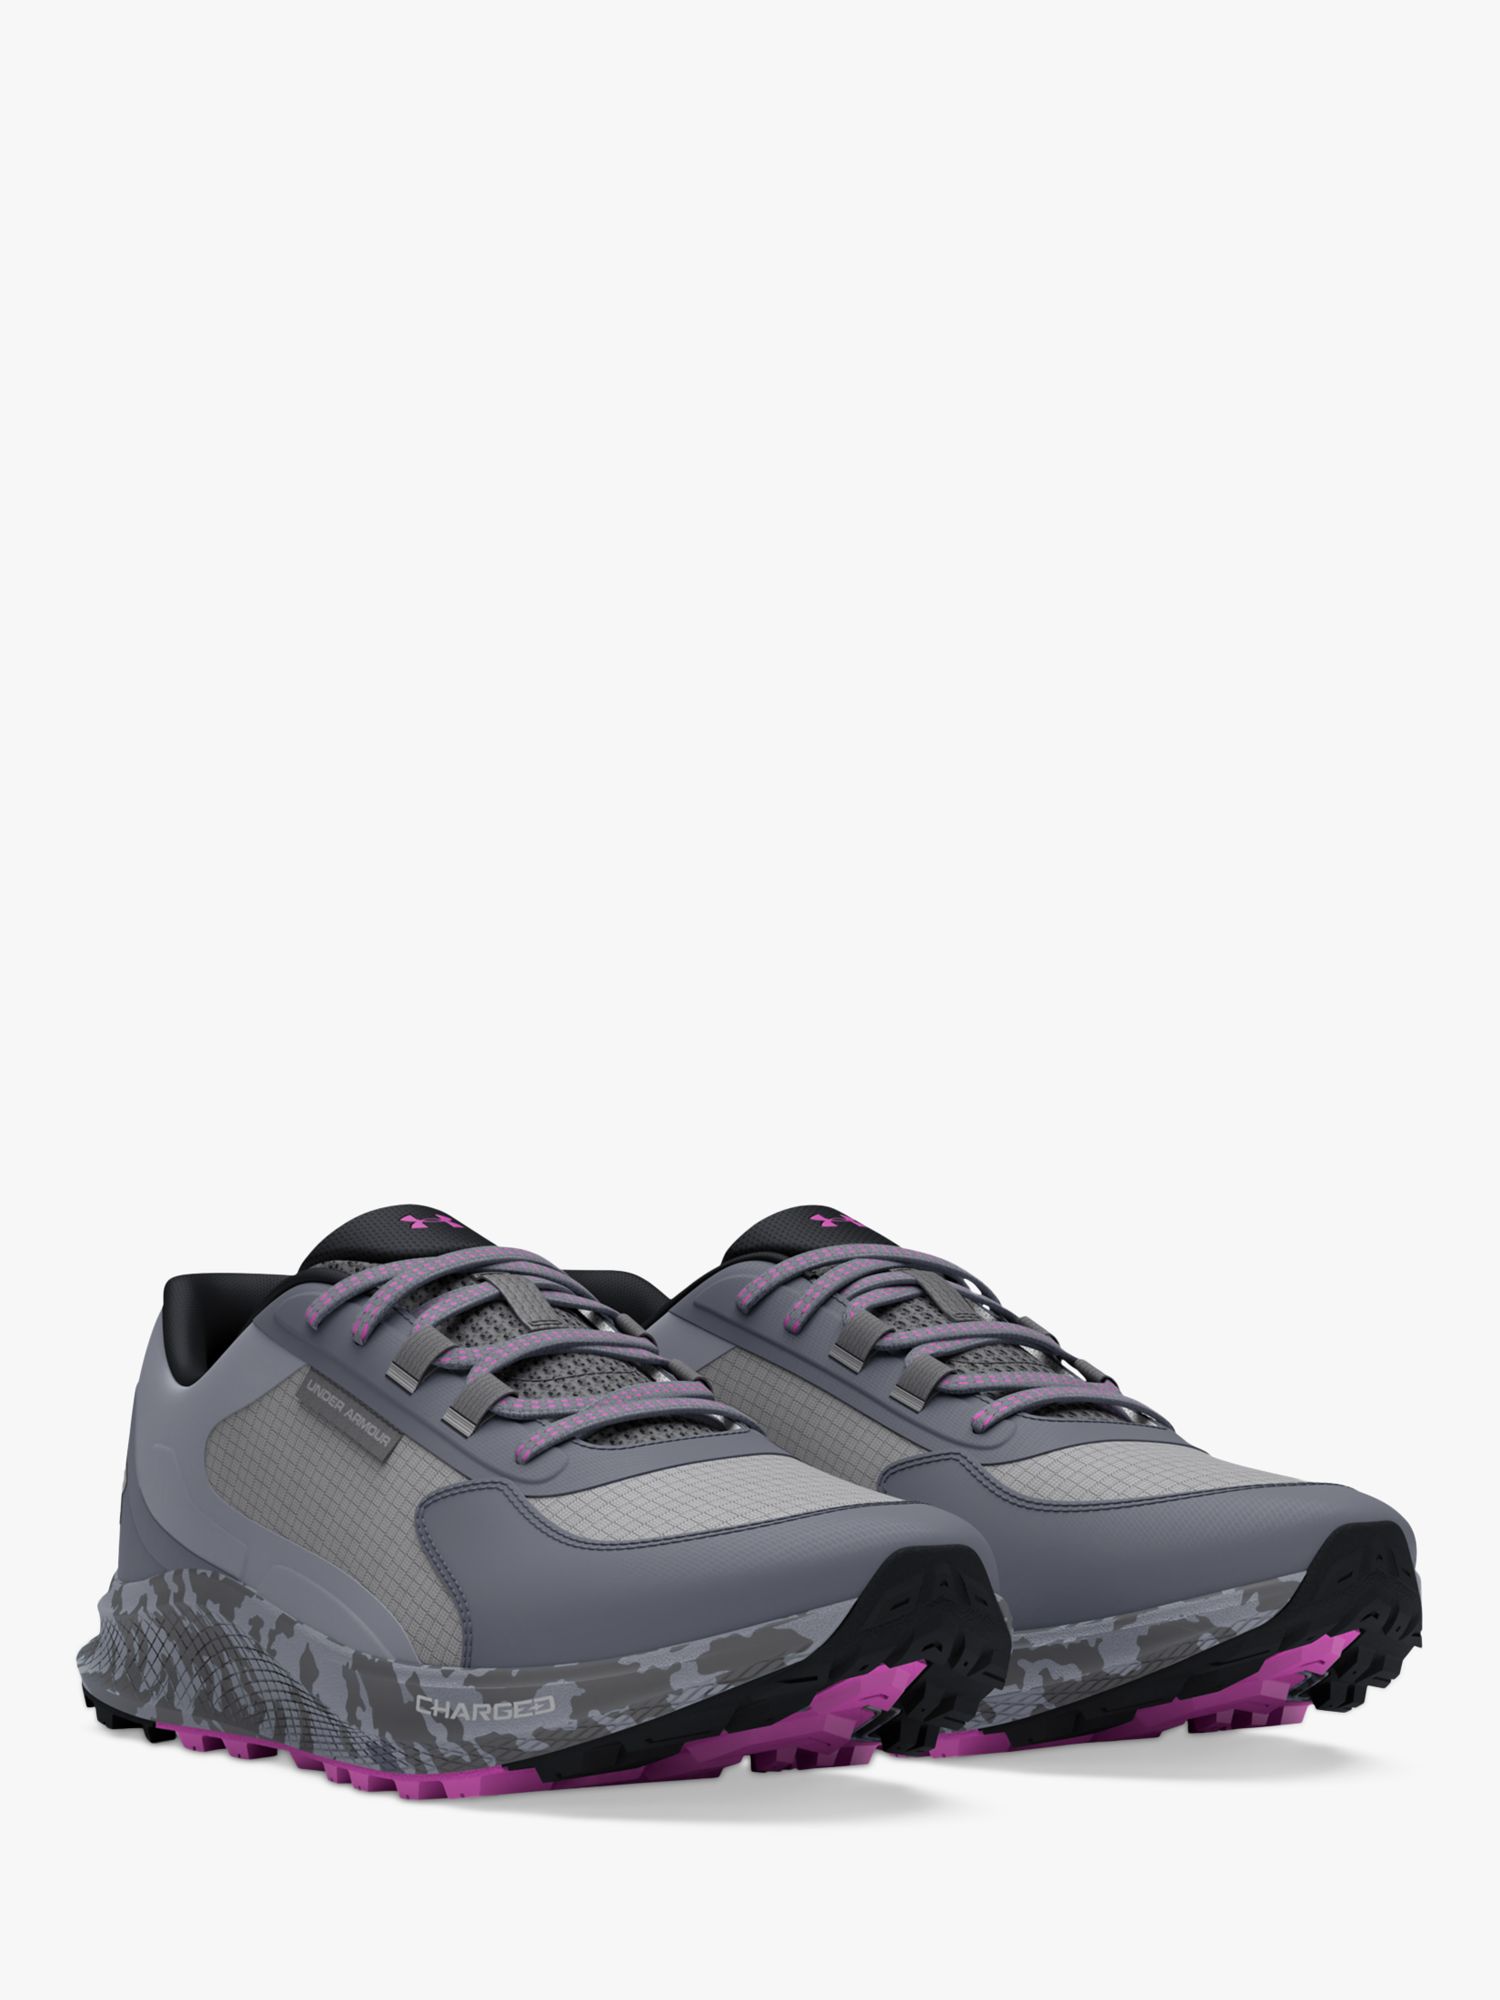 Buy Under Armour Bandit Trail 3 Running Shoes, Gray/Magenta Online at johnlewis.com